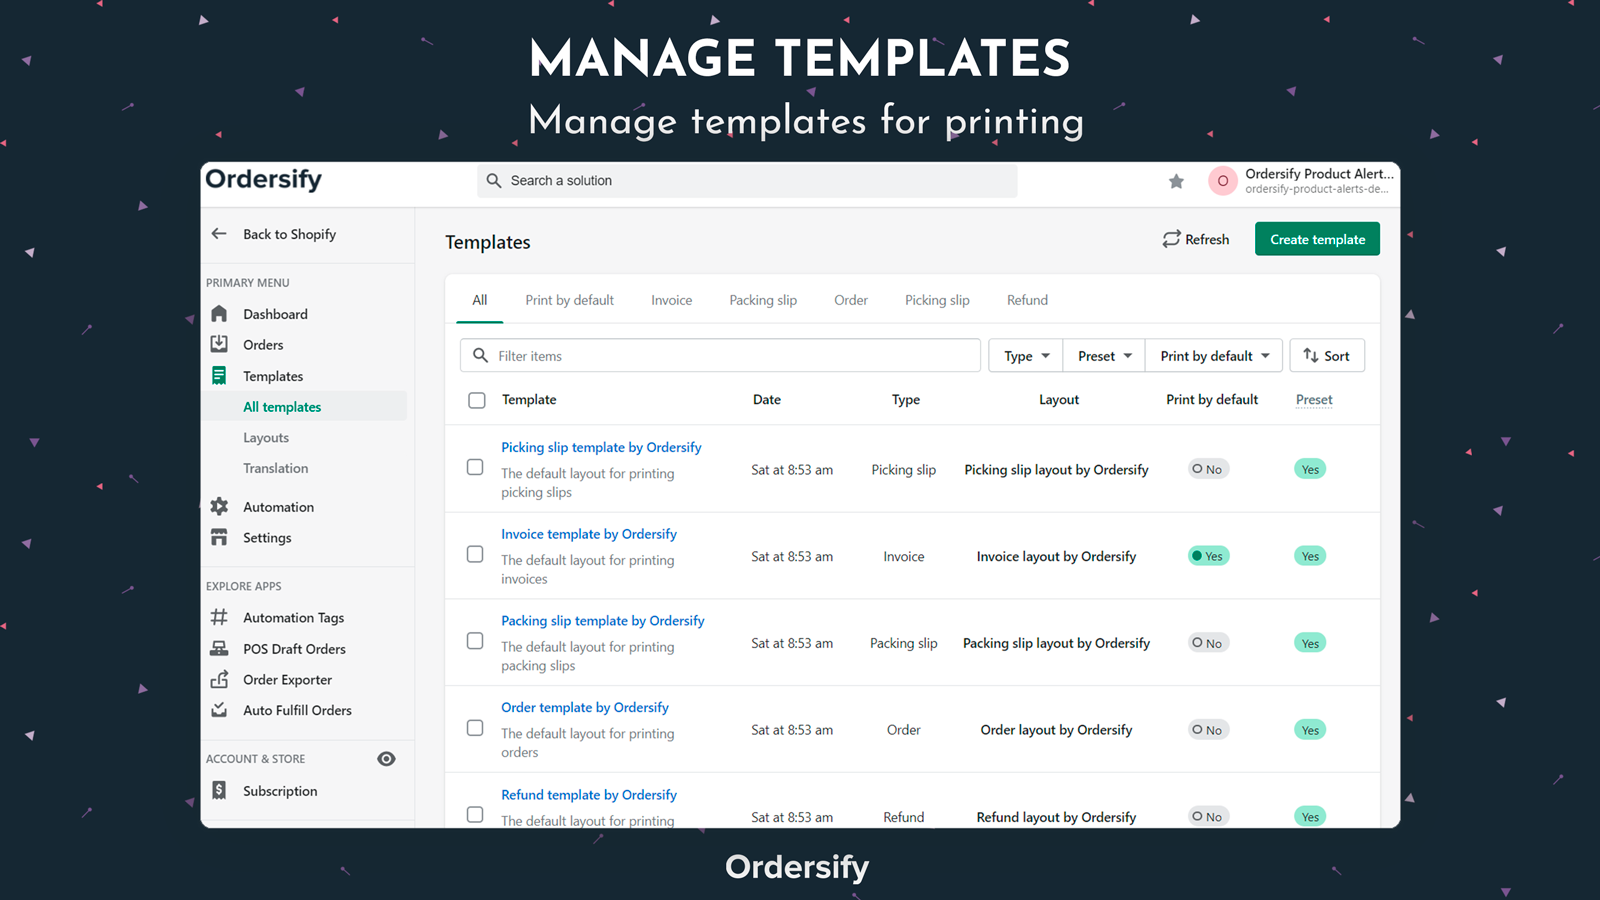 Manage templates for printing